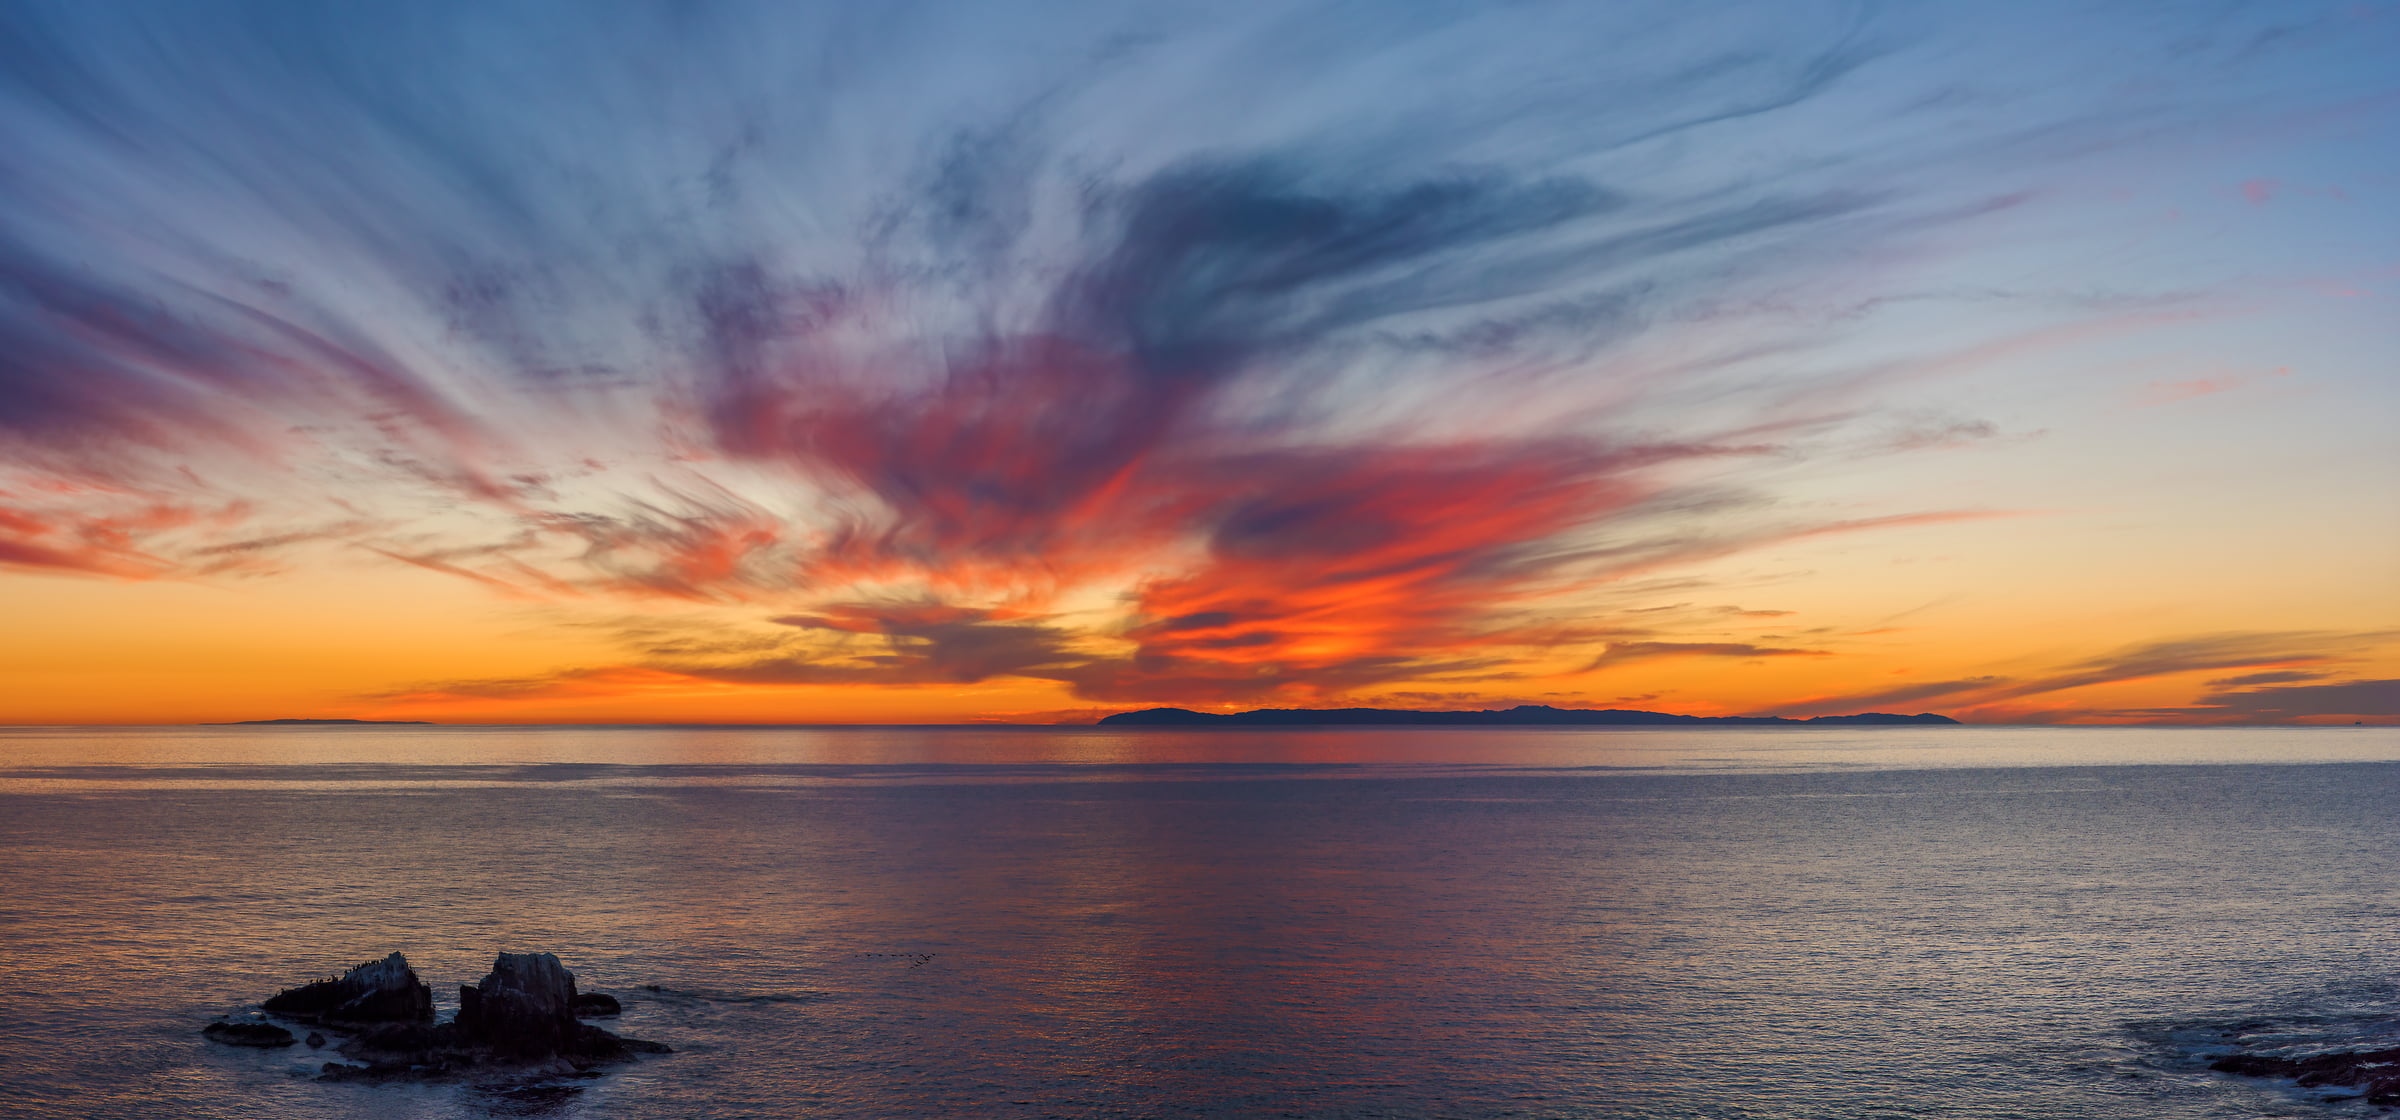 176 megapixels! A very high resolution, large-format VAST photo of a beautiful sunset over the ocean; created by Jim Tarpo in Laguna Beach, California